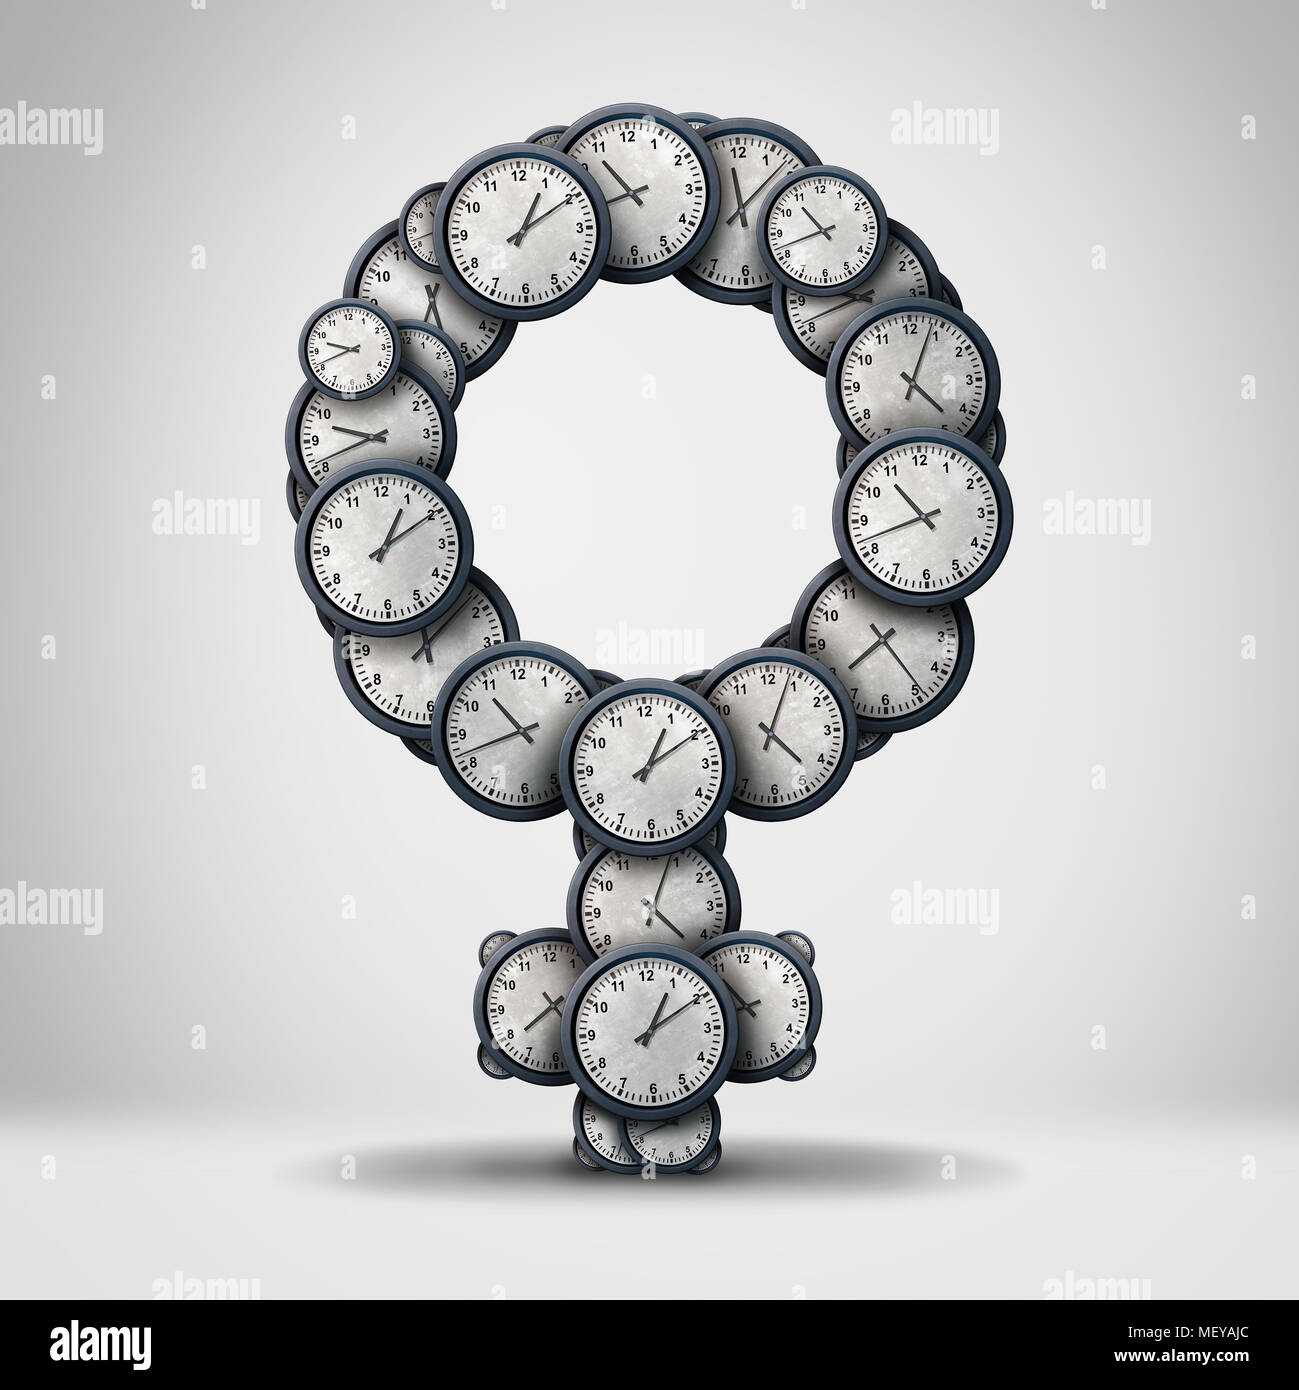 Female fertility clock symbol and biological time ticking concept with a group of time pieces as a metaphor for the stress of reproductive age. Stock Photo